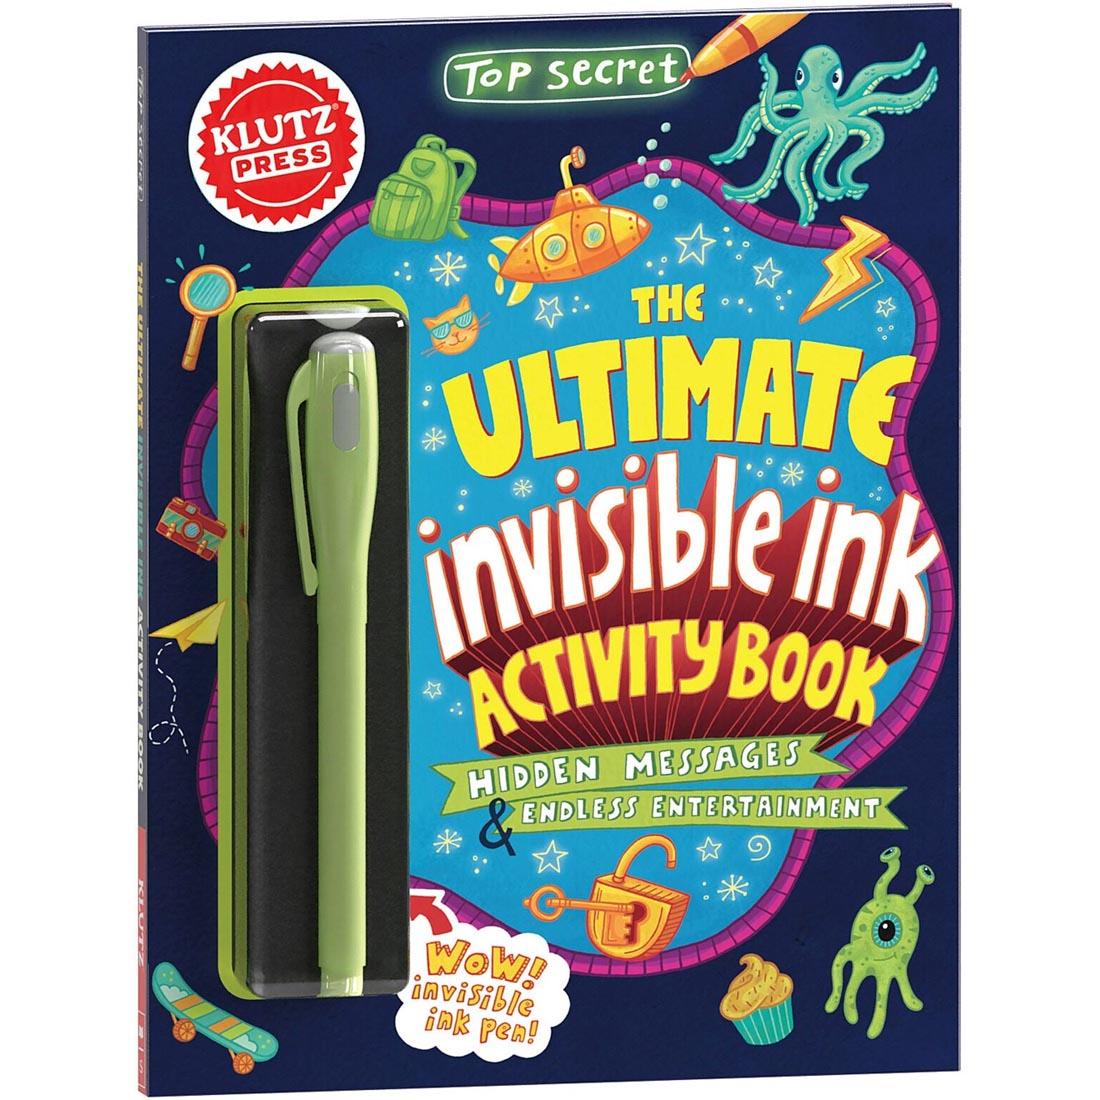 The Ultimate Invisible Ink Activity Book By Klutz Press